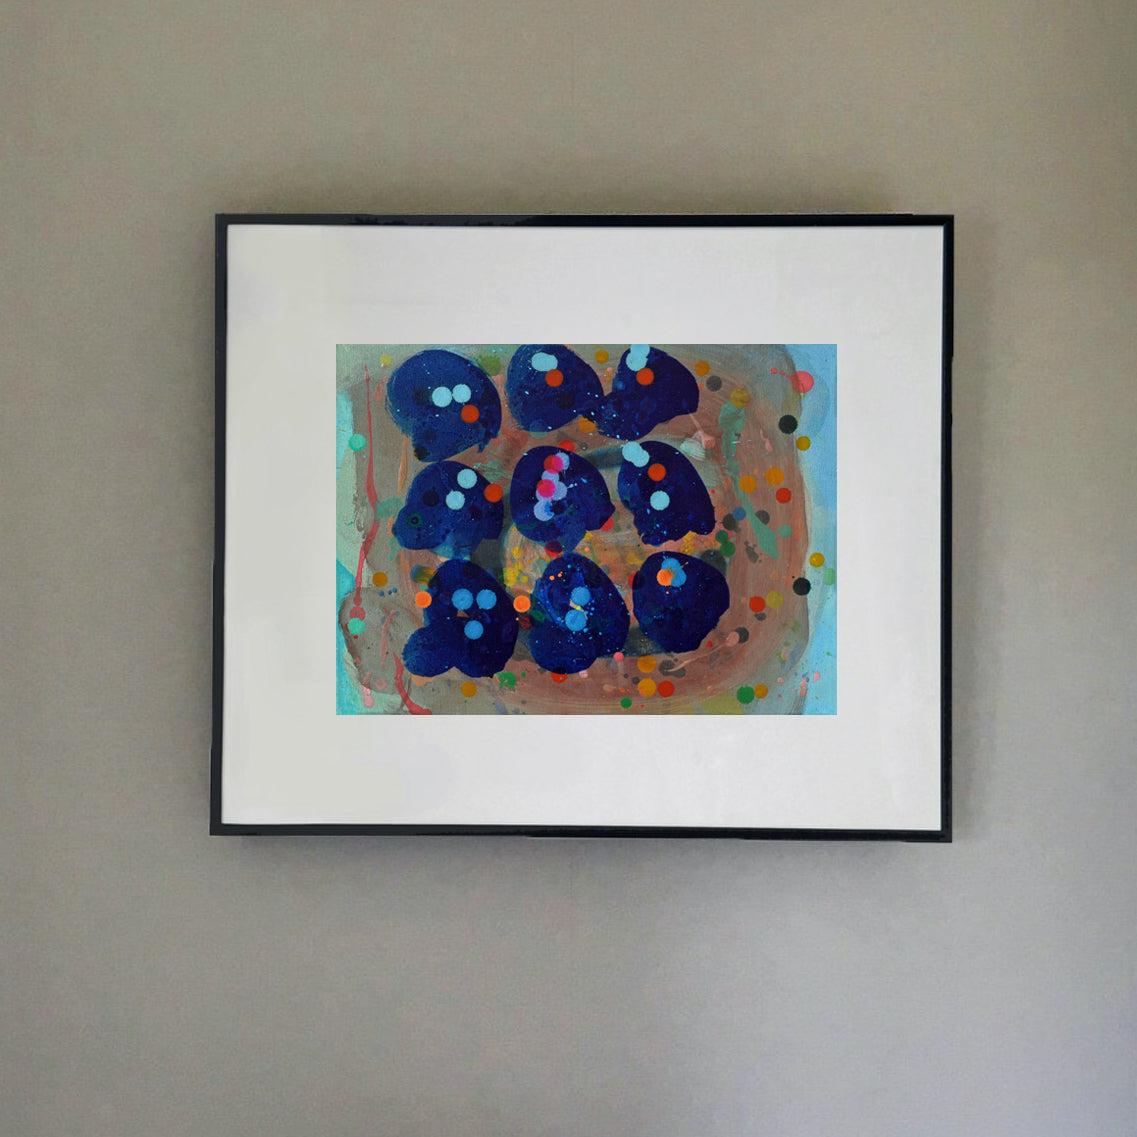 Nine blue shells on an ochre background with coloured spots of blues, reds and oranges by Ella Carty